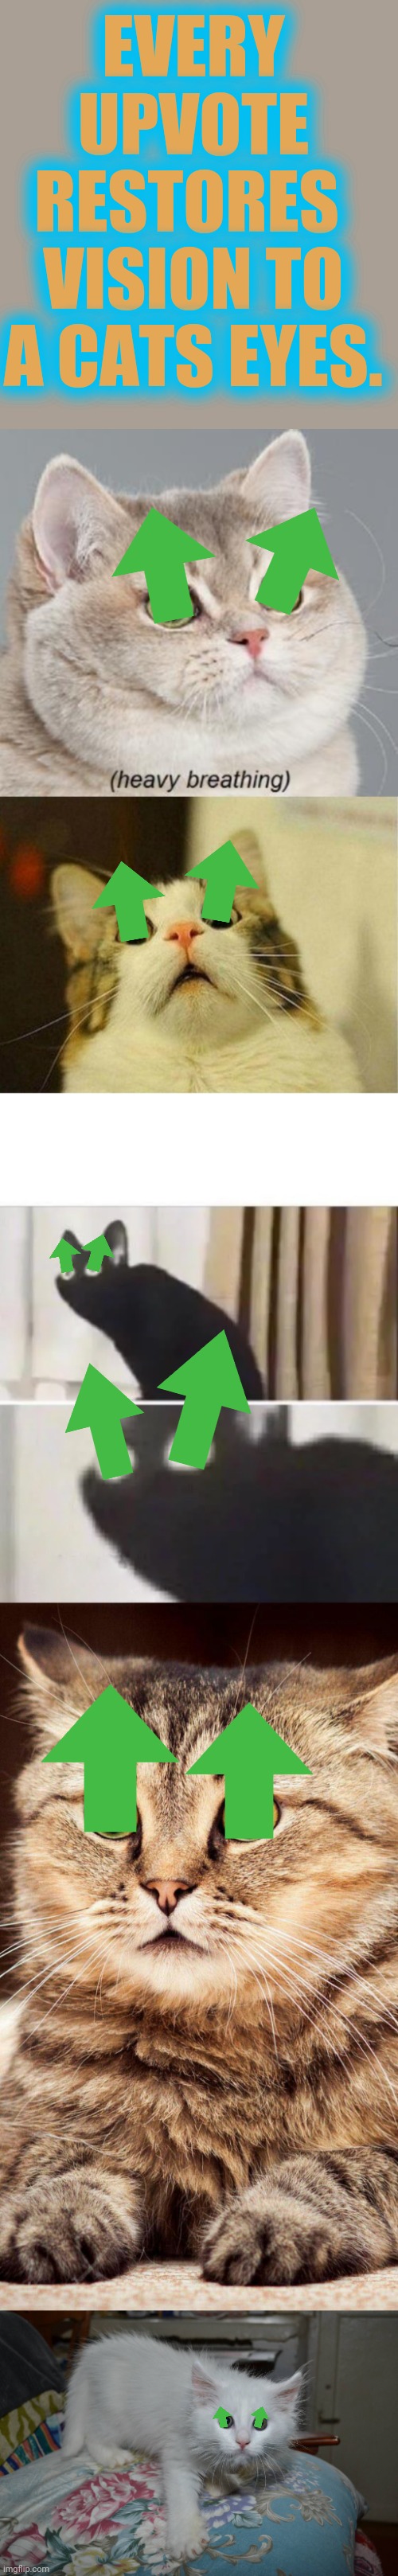 Let's see if we can place all 12 upvotes where they belong in box below meme | EVERY UPVOTE RESTORES 
VISION TO A CATS EYES. | image tagged in memes,heavy breathing cat,scared cat,oh no black cat,shocked cat,frightened cat | made w/ Imgflip meme maker